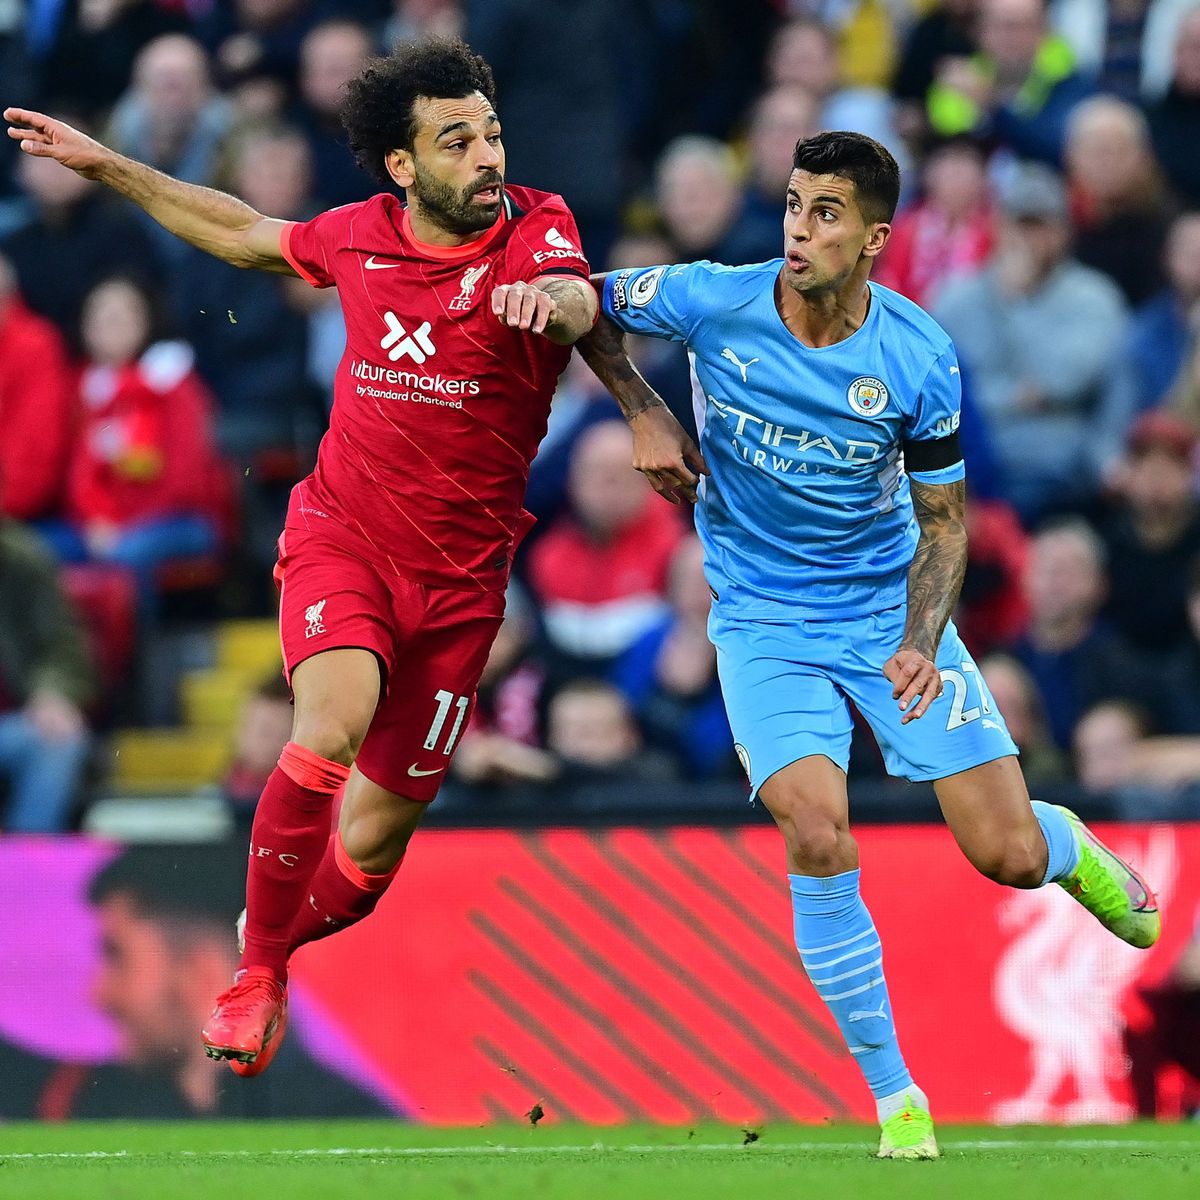 Man City, Liverpool match ends in a draw, and sets up 7 dramatic, do-or-die weeks